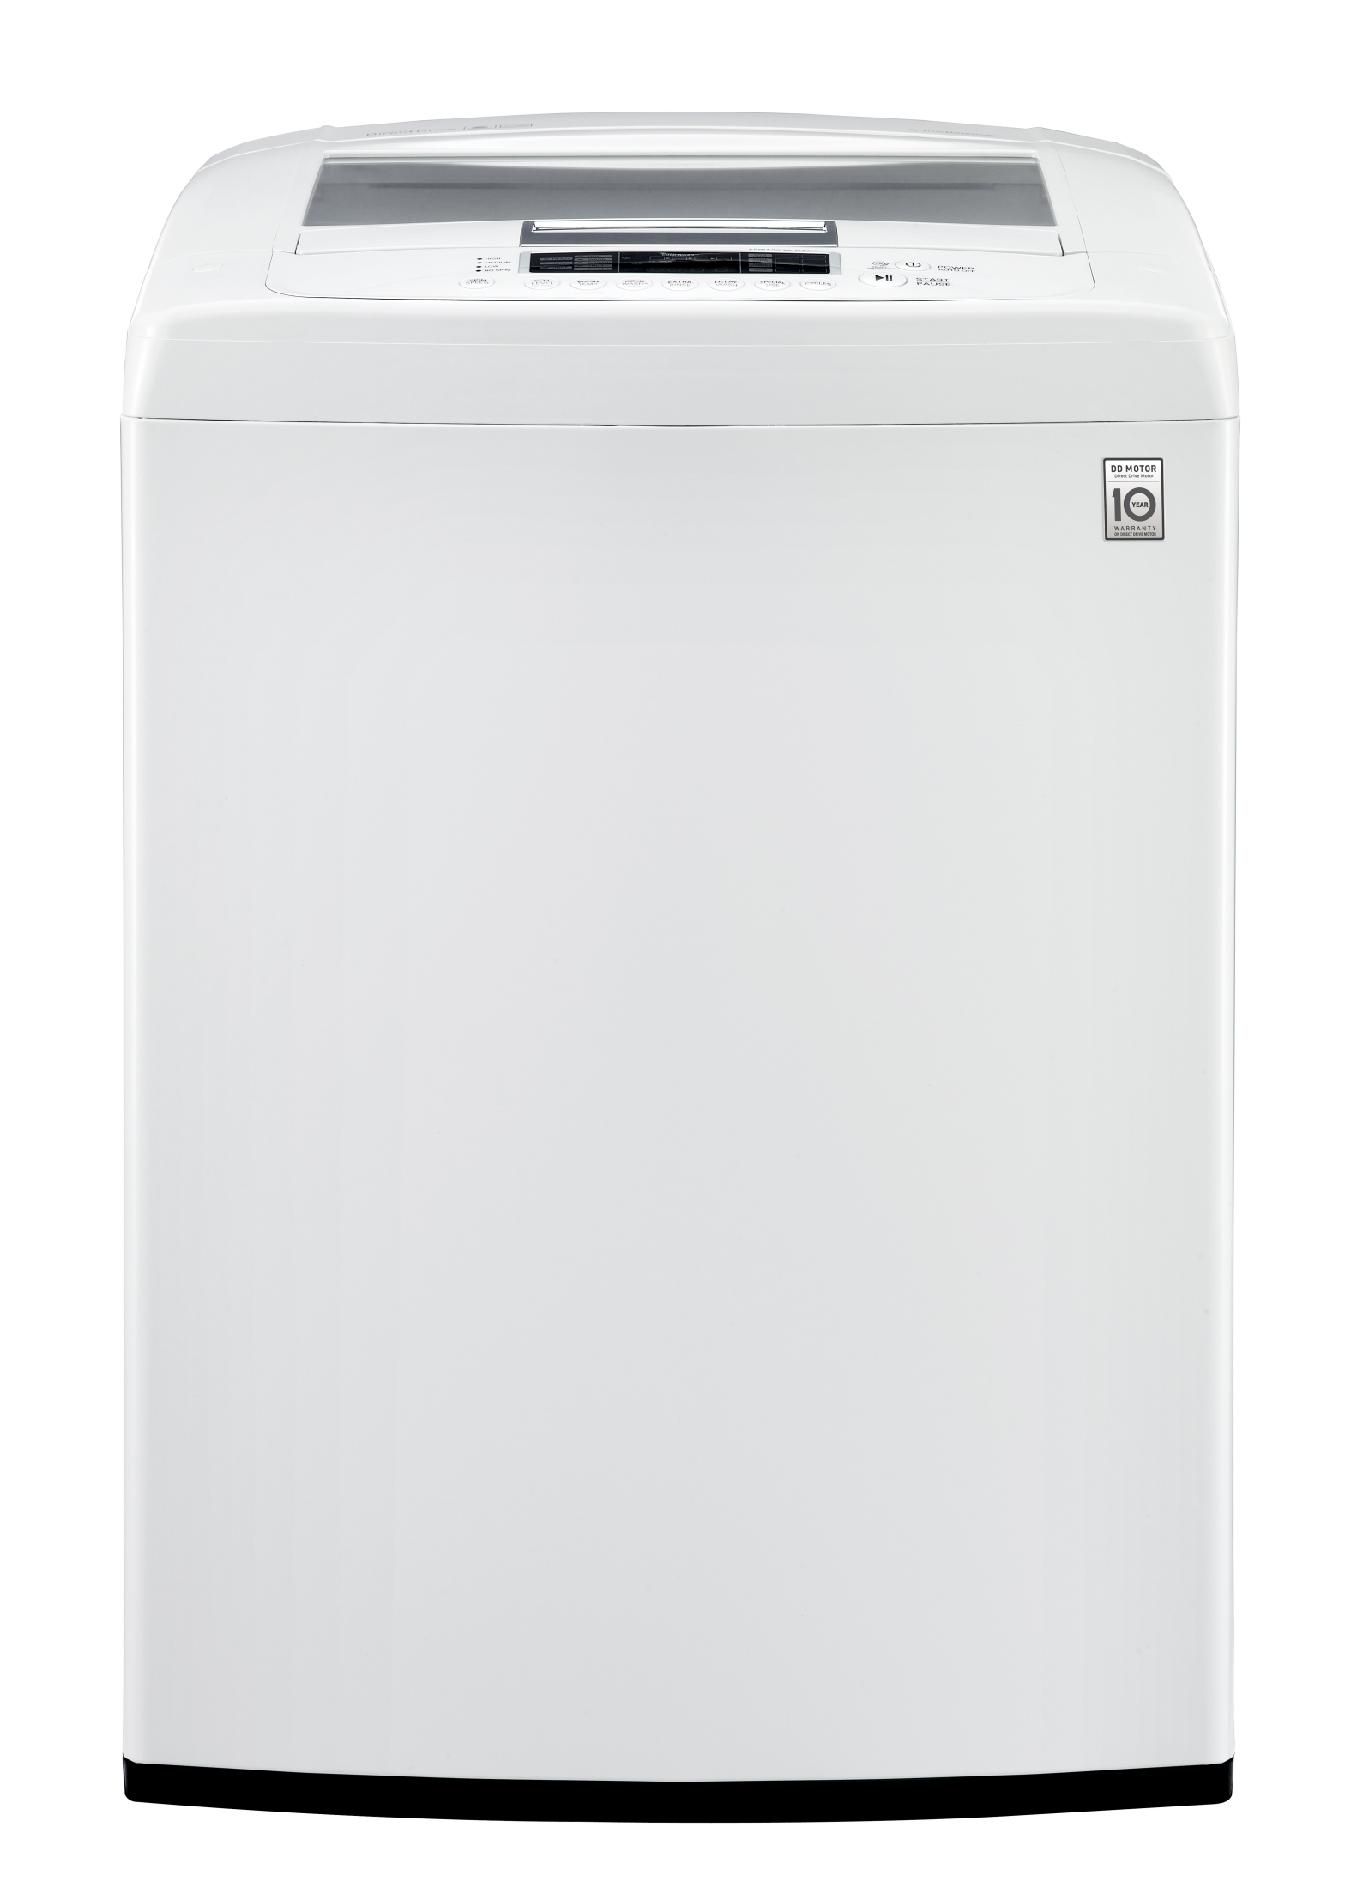 LG 4.3 cu. ft. High-Efficiency Top-Load Washer - White 4.0 cu.ft. - 4.5 cu.ft.